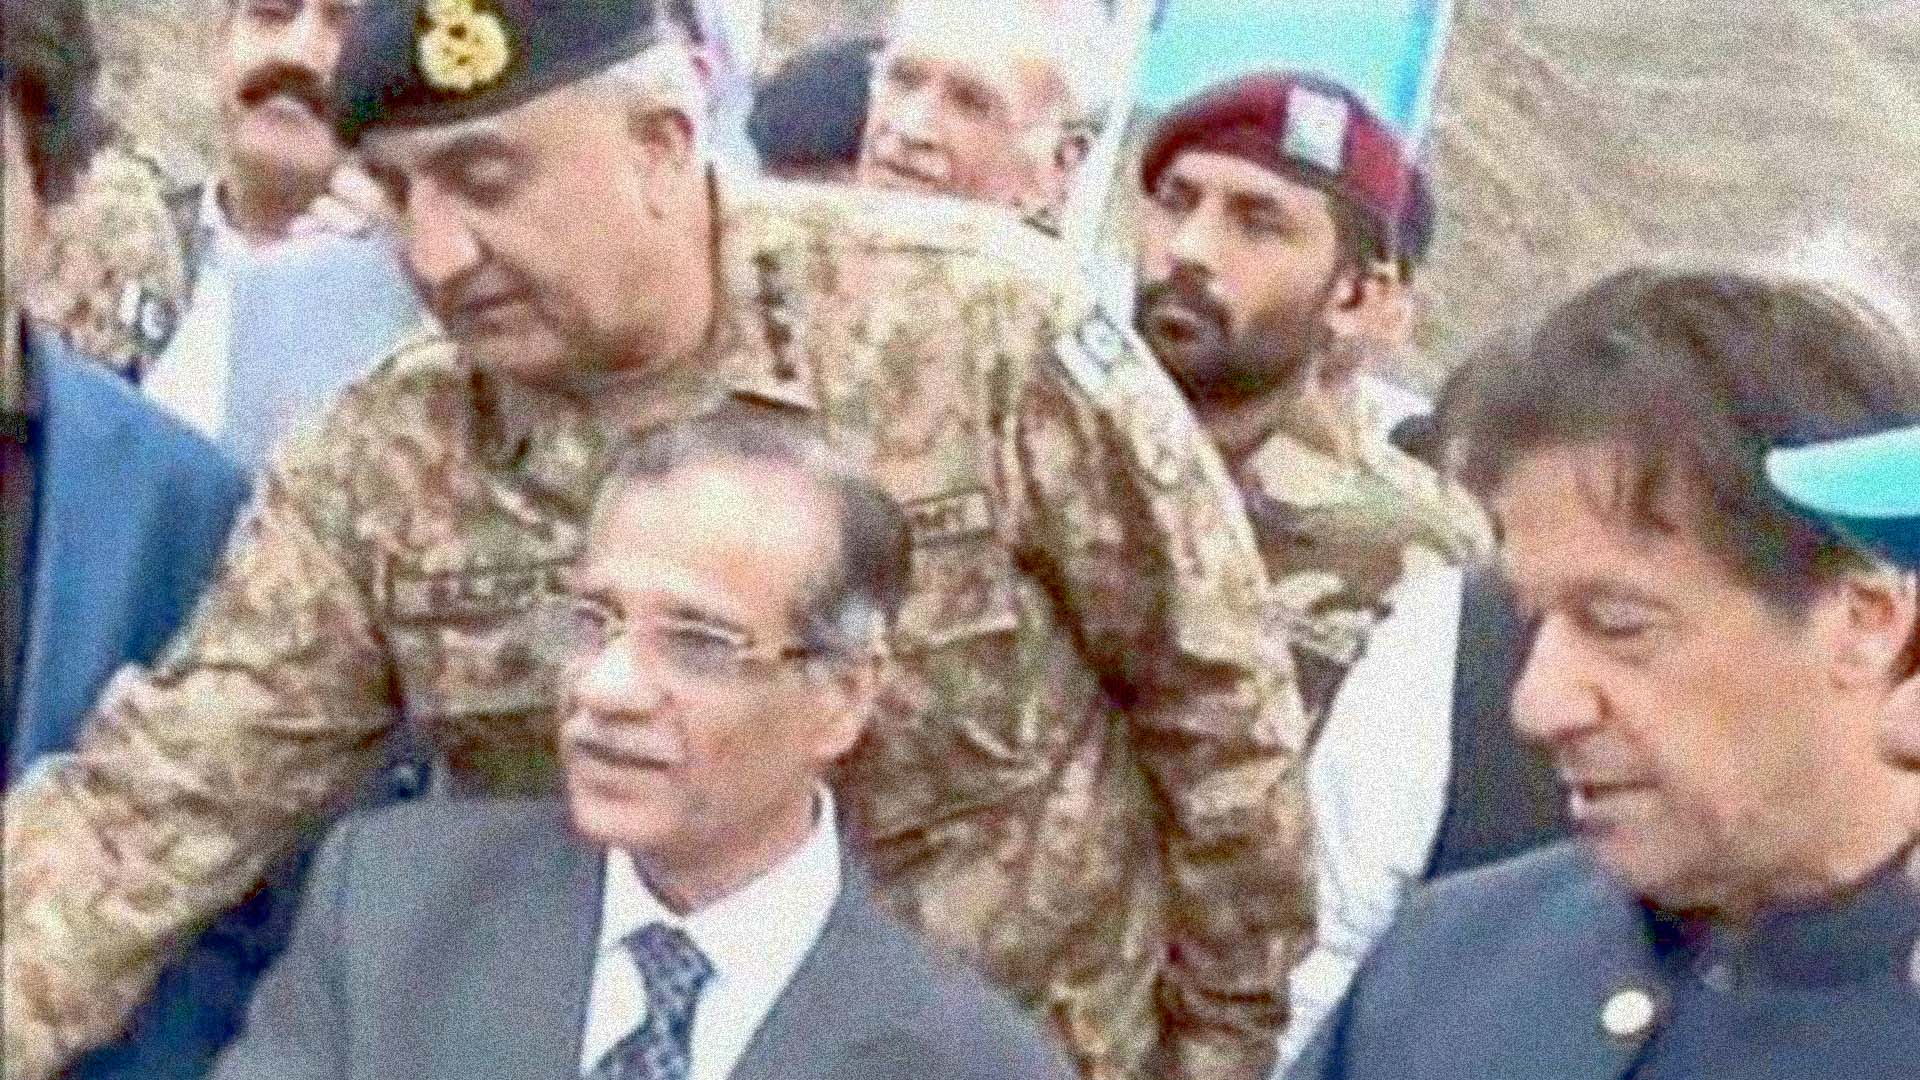 A file photo is shown of former COAS Bajwa, former CJ Nisar, and former PM Khan at the opening ceremony of Mohmand Dam in 2019.